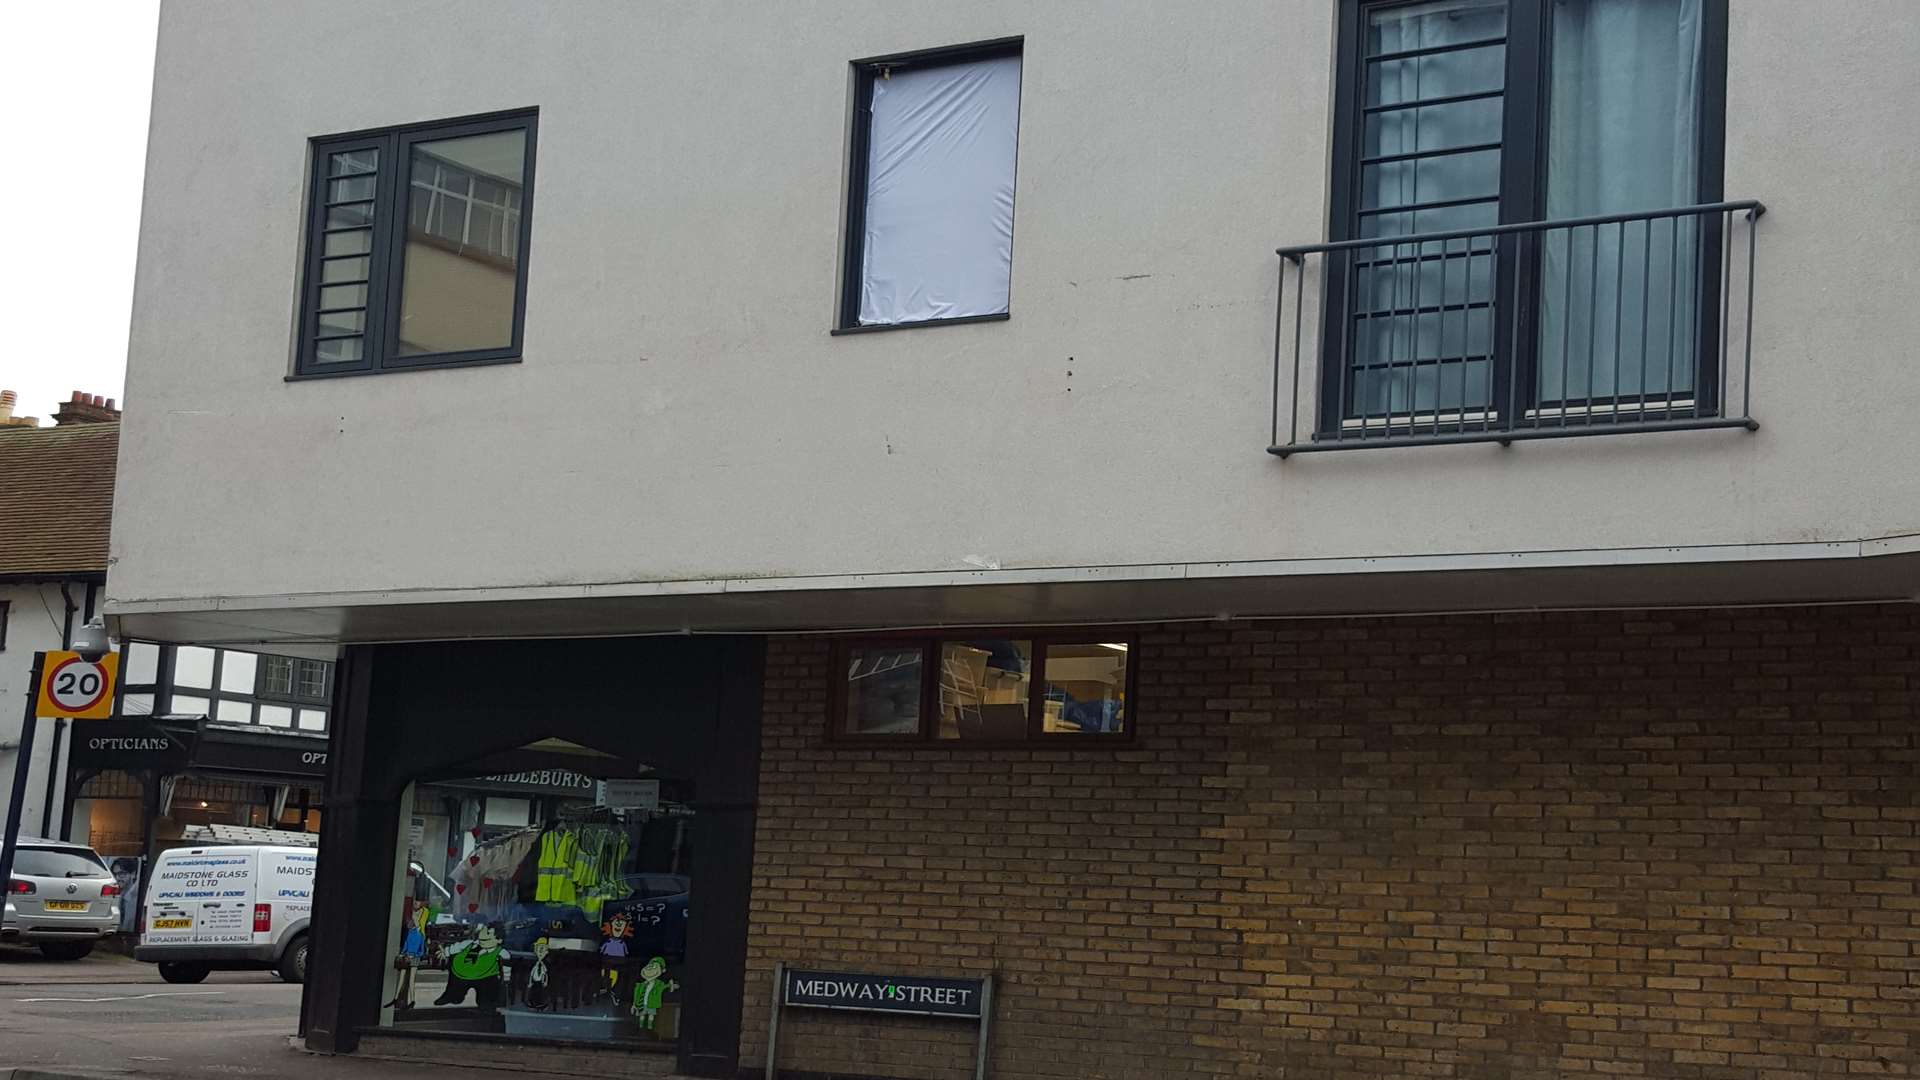 The window fell from a first floor flat